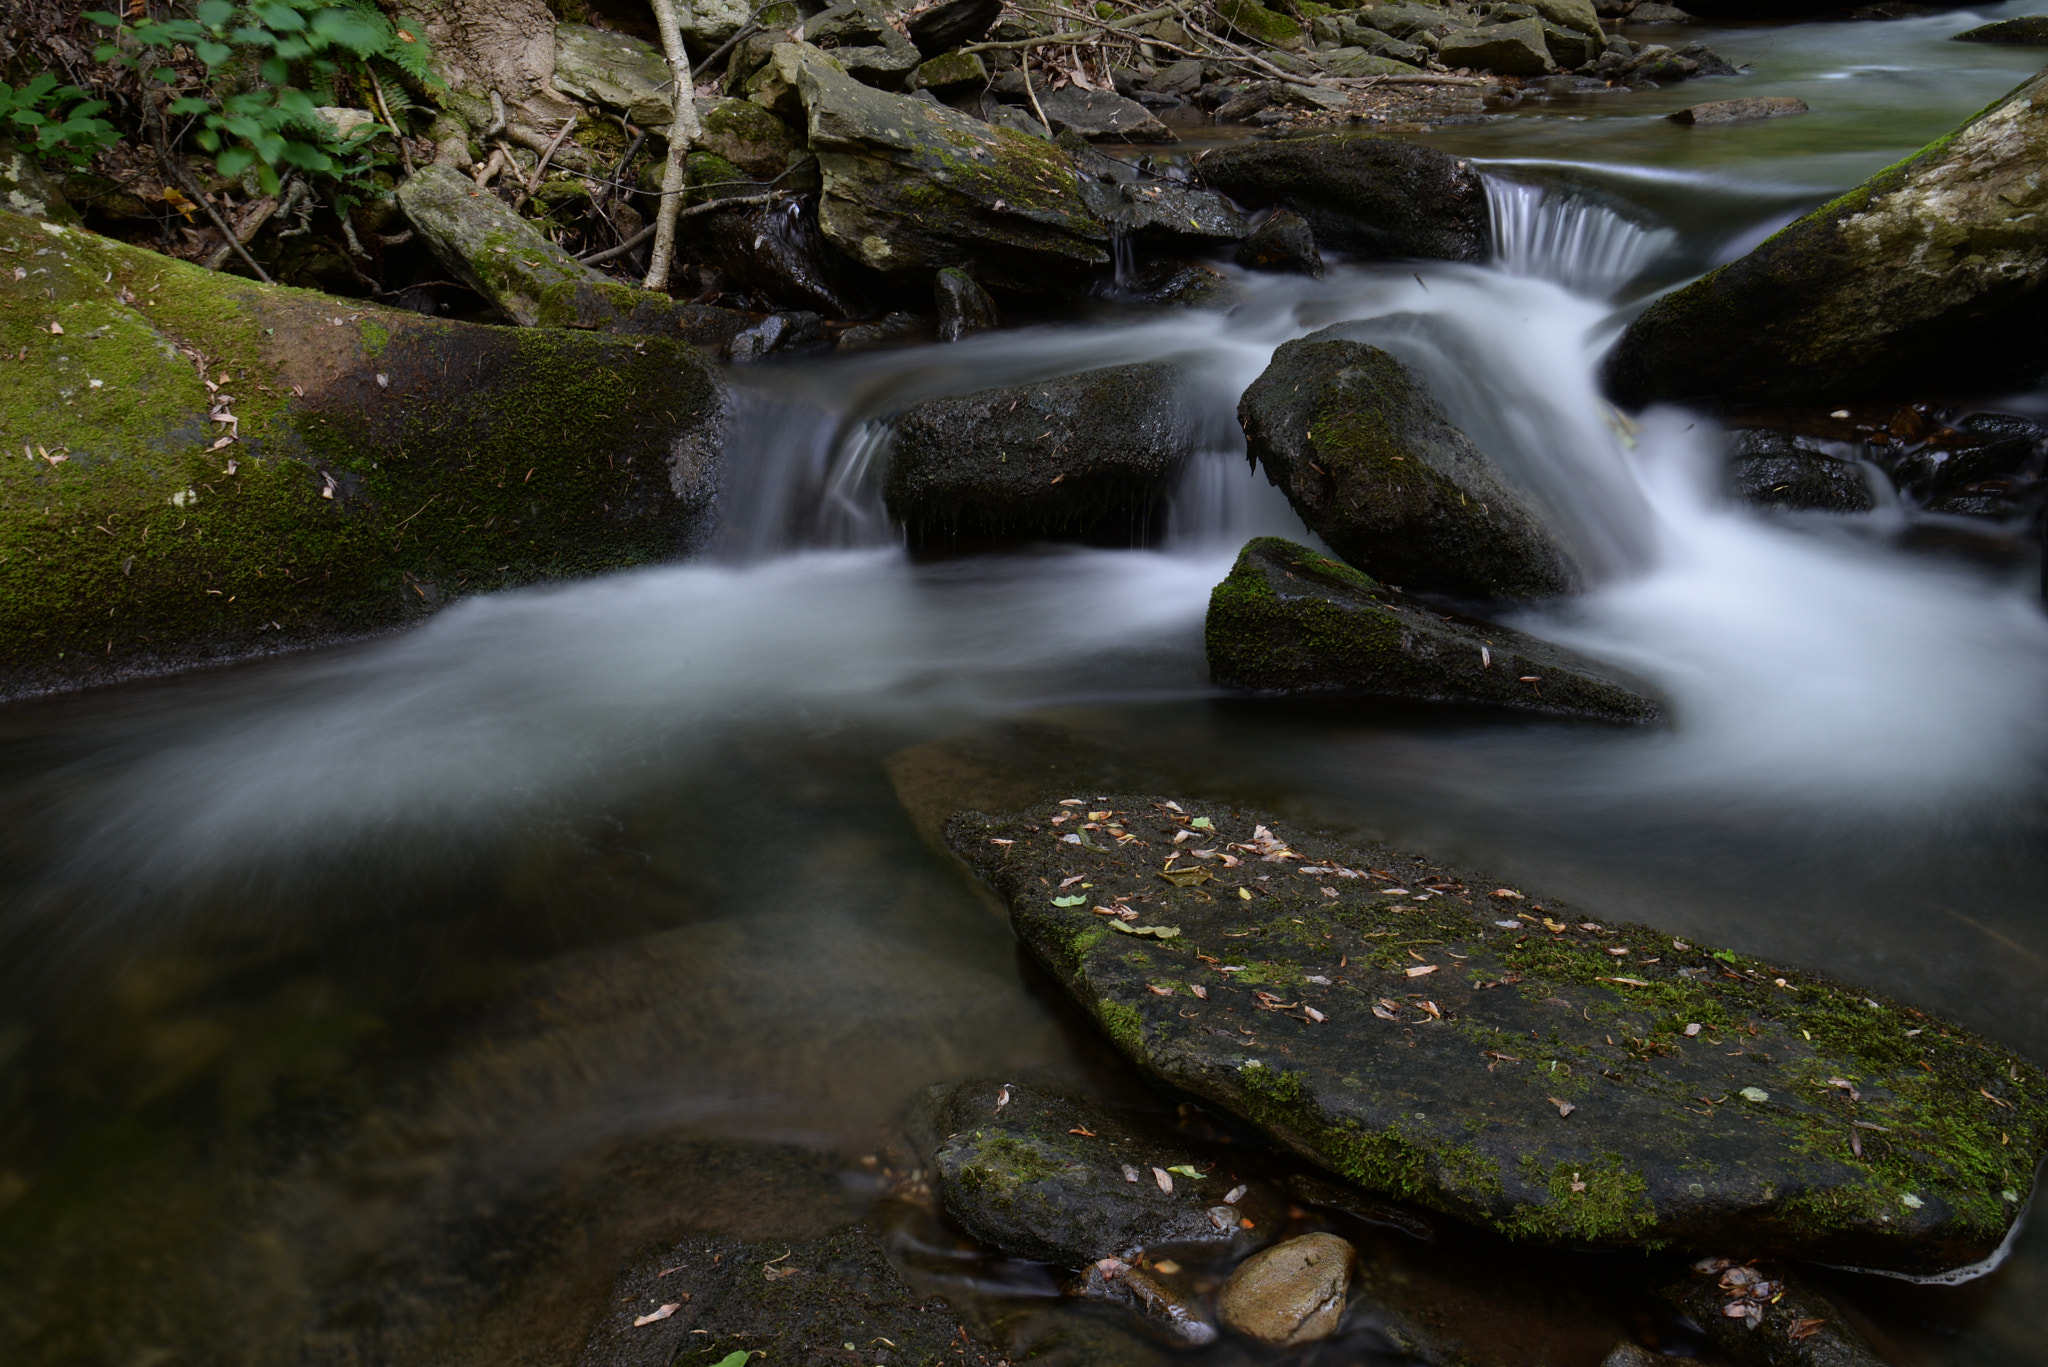 Tamron SP AF 17-35mm F2.8-4 Di LD Aspherical (IF) sample photo. Relaxing hike photography